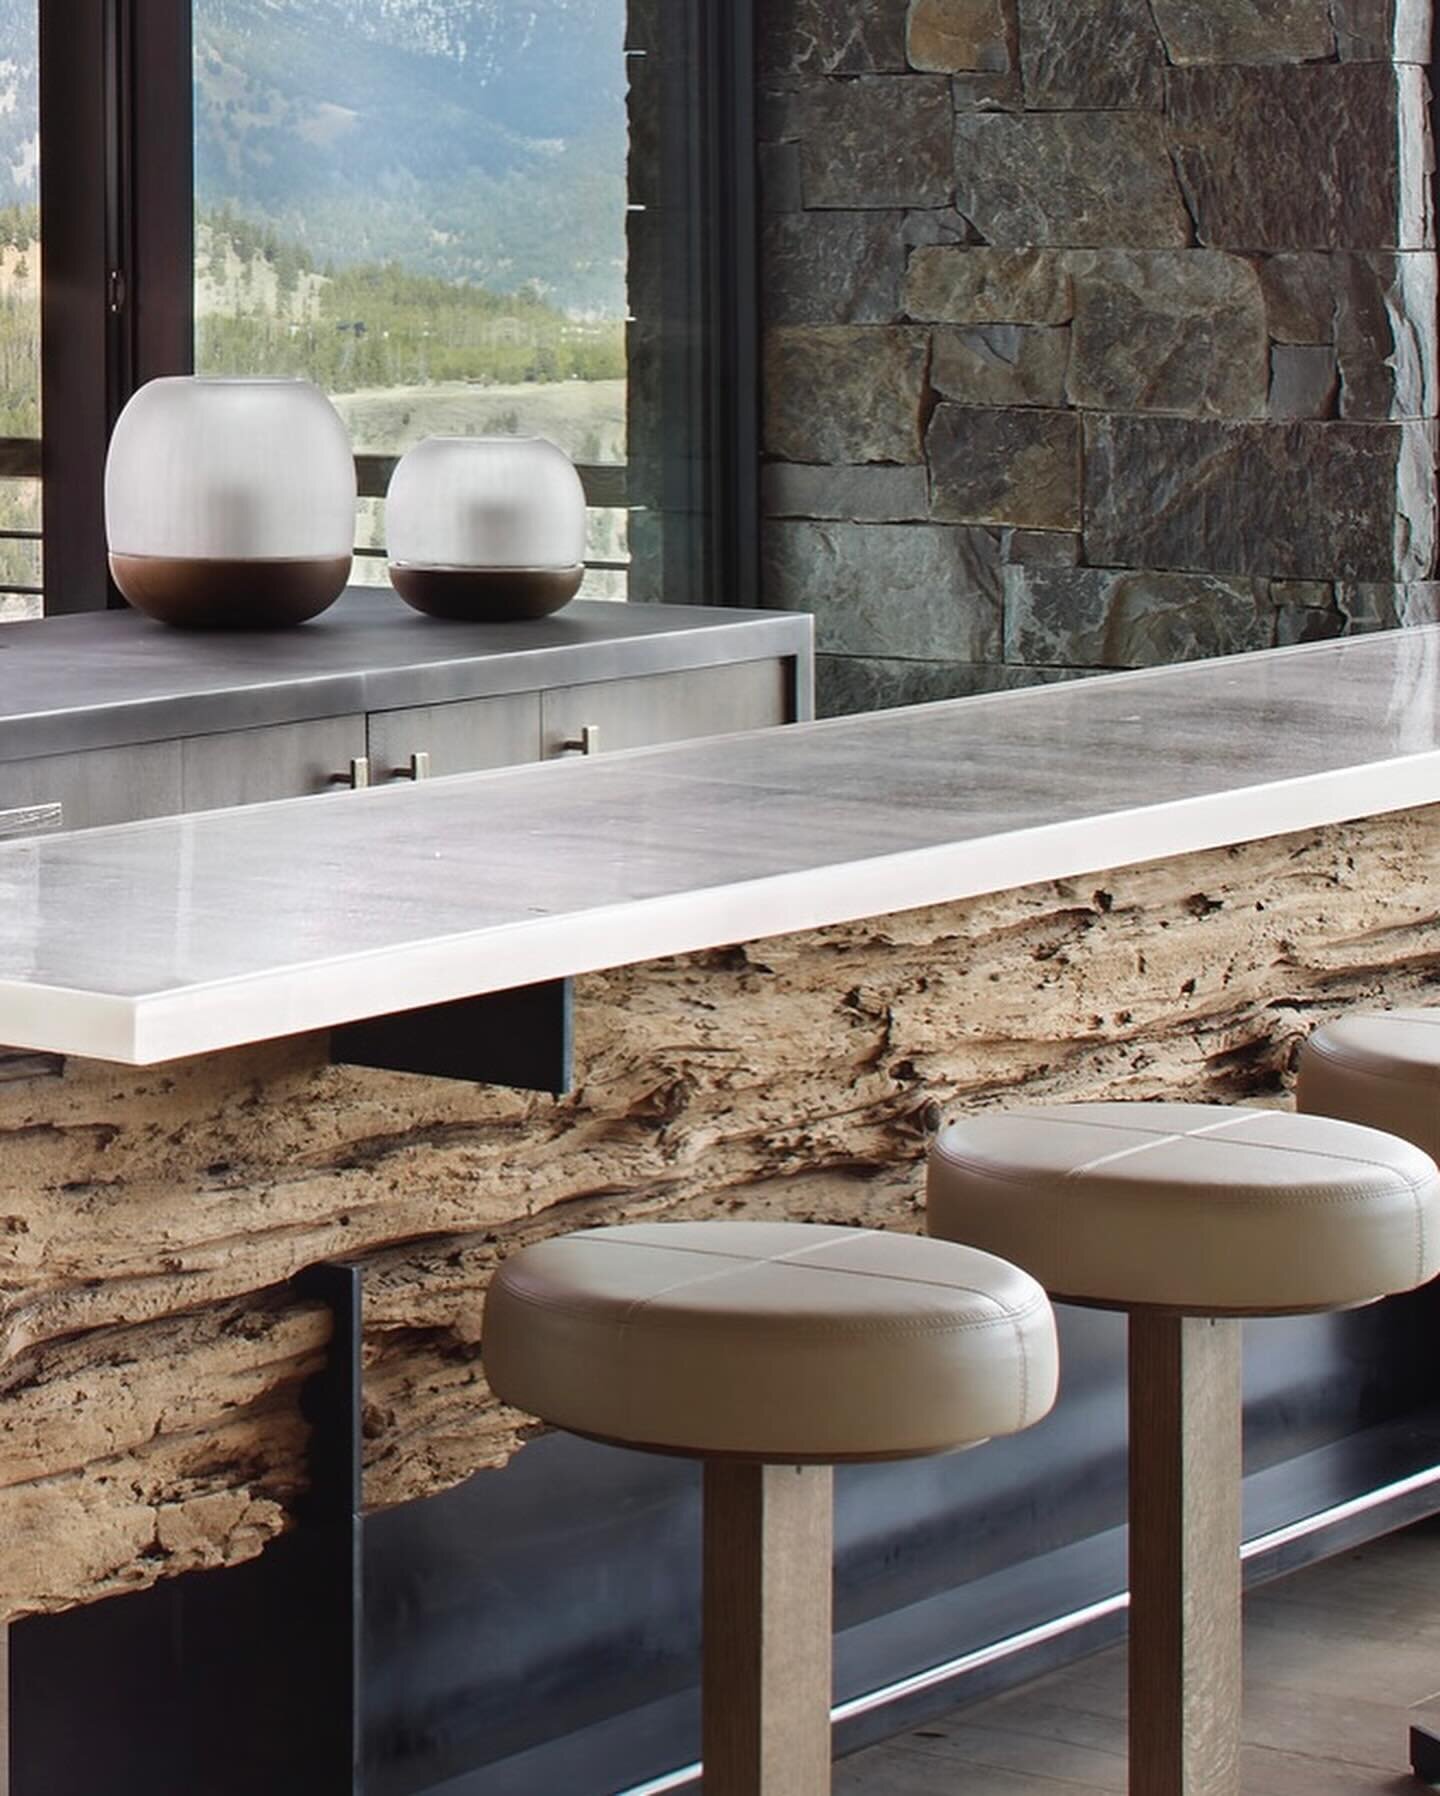 Cast Glass Bar Top - 10&rsquo; Long and 2.5&rdquo; Thick for @highlinepartners 📸 @gibeonphoto #glassbartop #custom #architecture #design #bigsky #montana #luxury #lifestyle